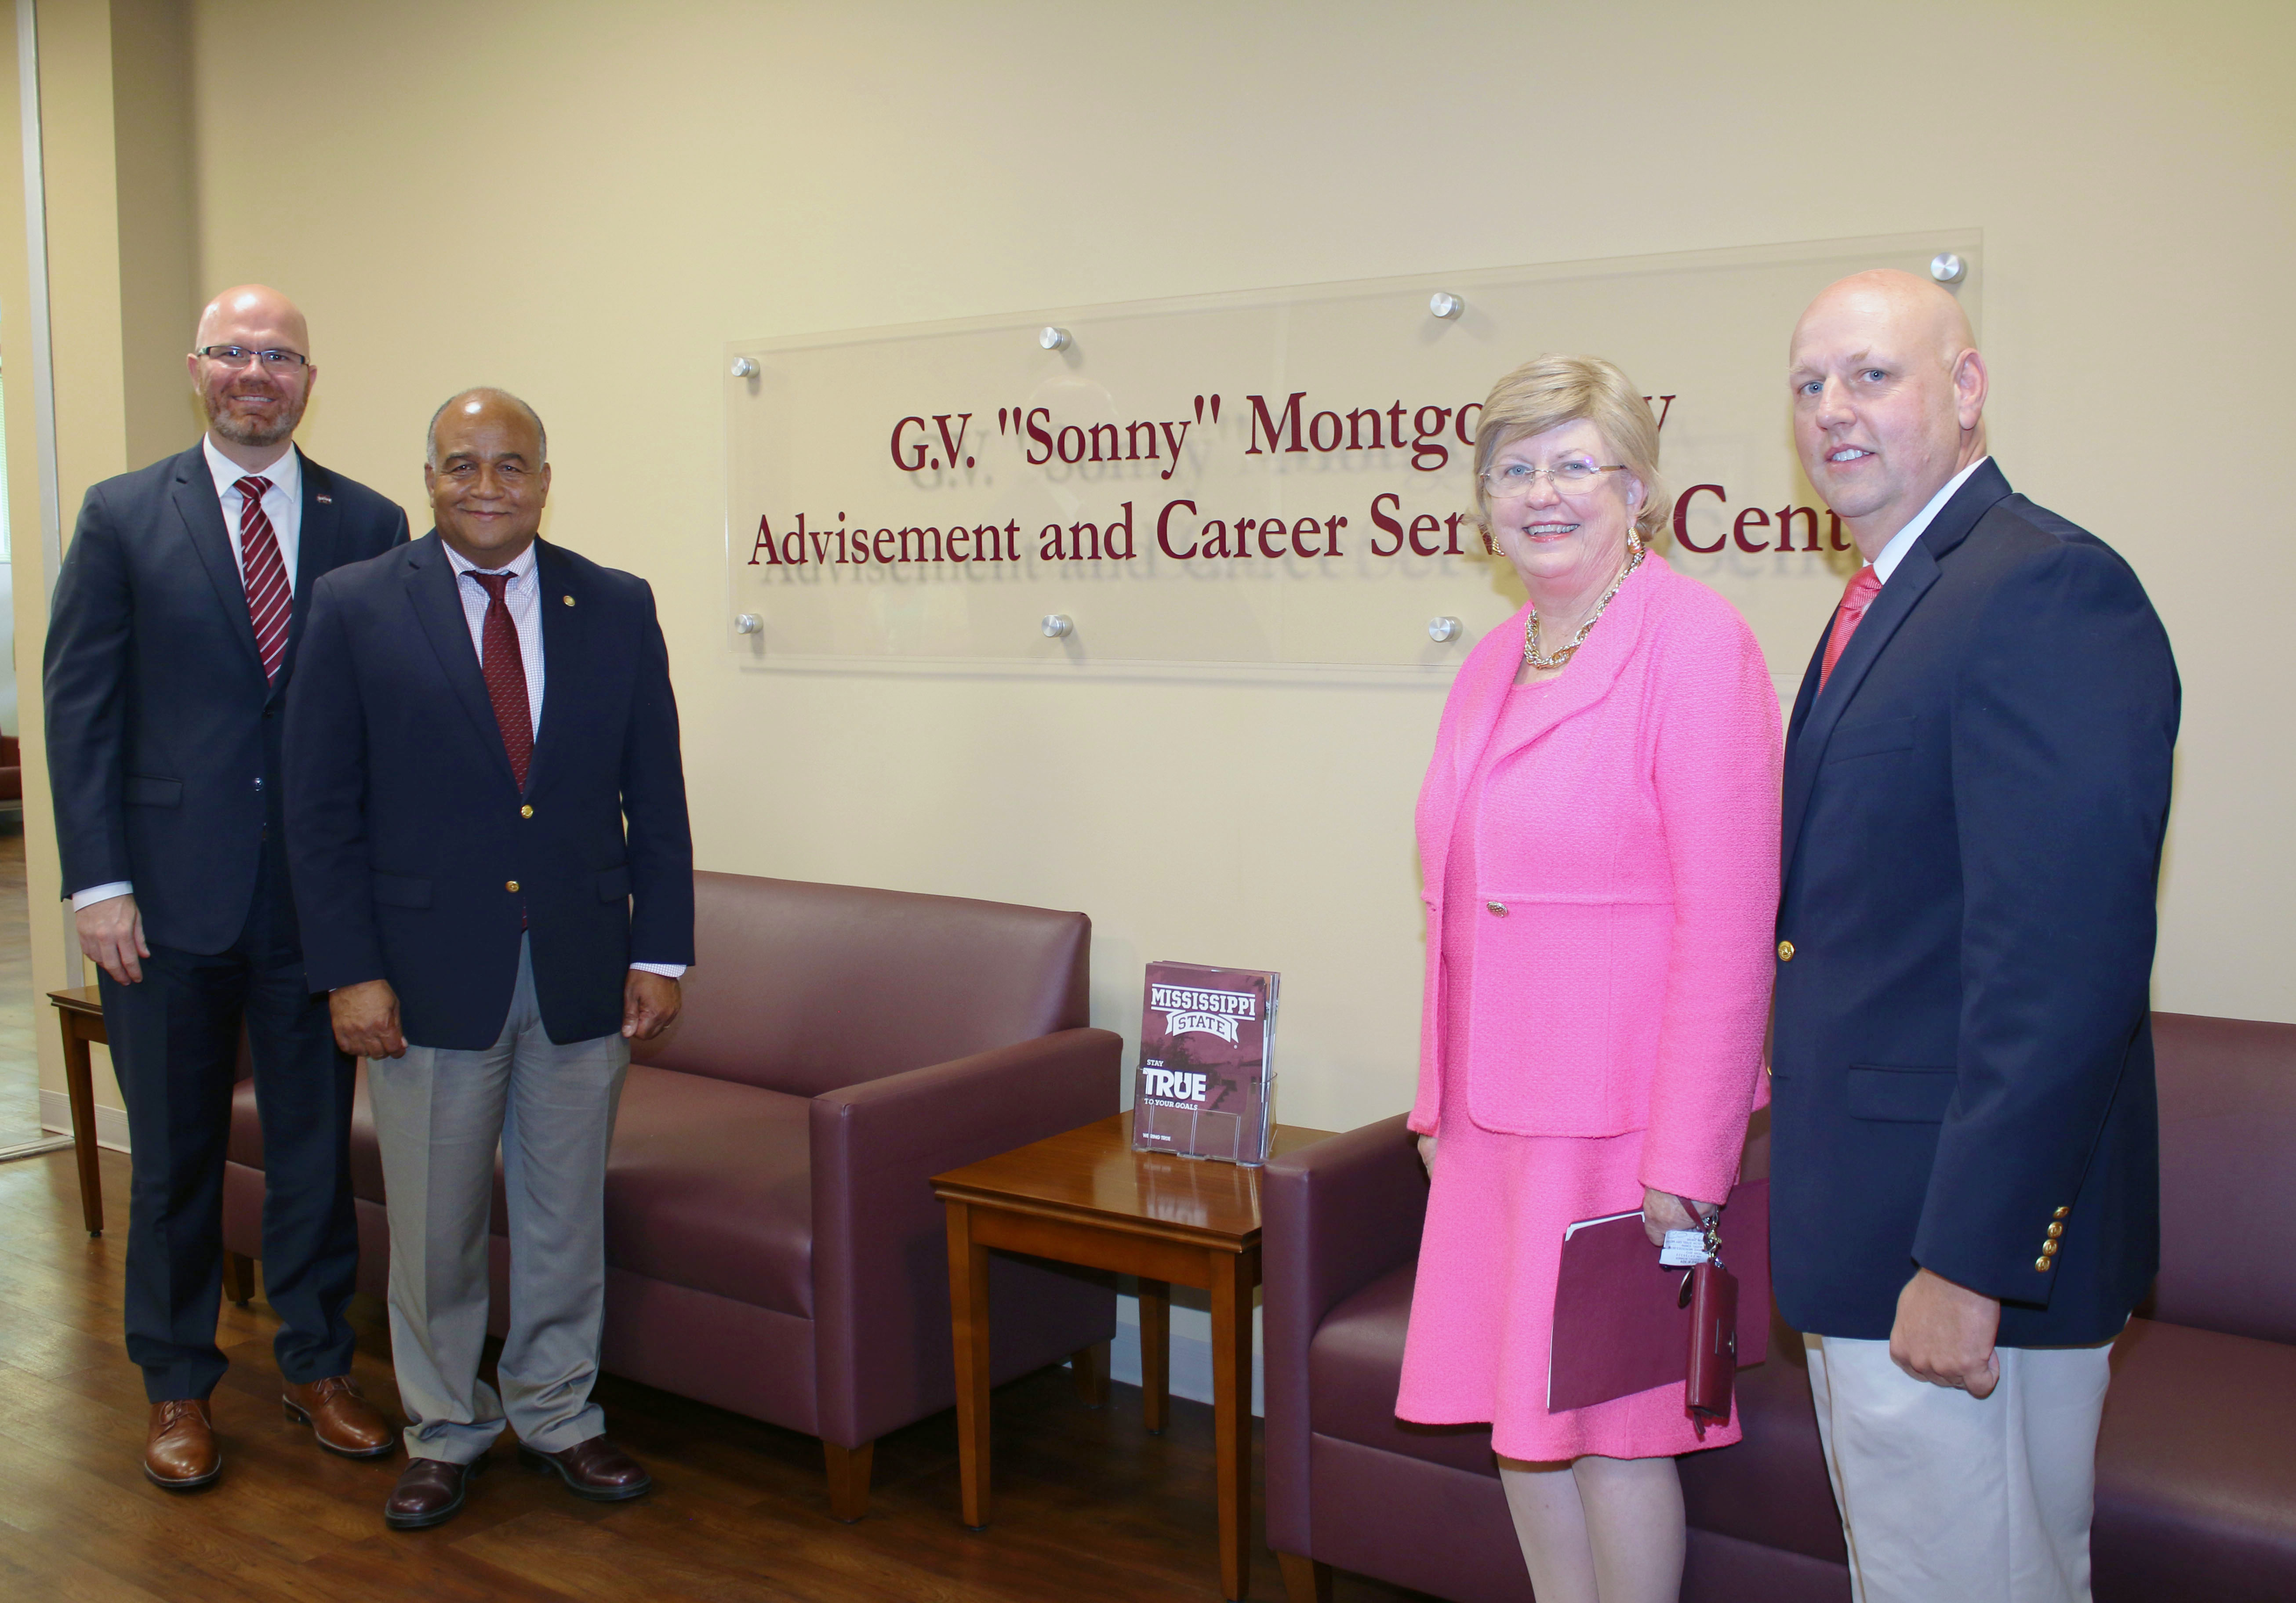 New G.V. “Sonny” Montgomery Advisement and Career Services Center dedicated at MSU-Meridian